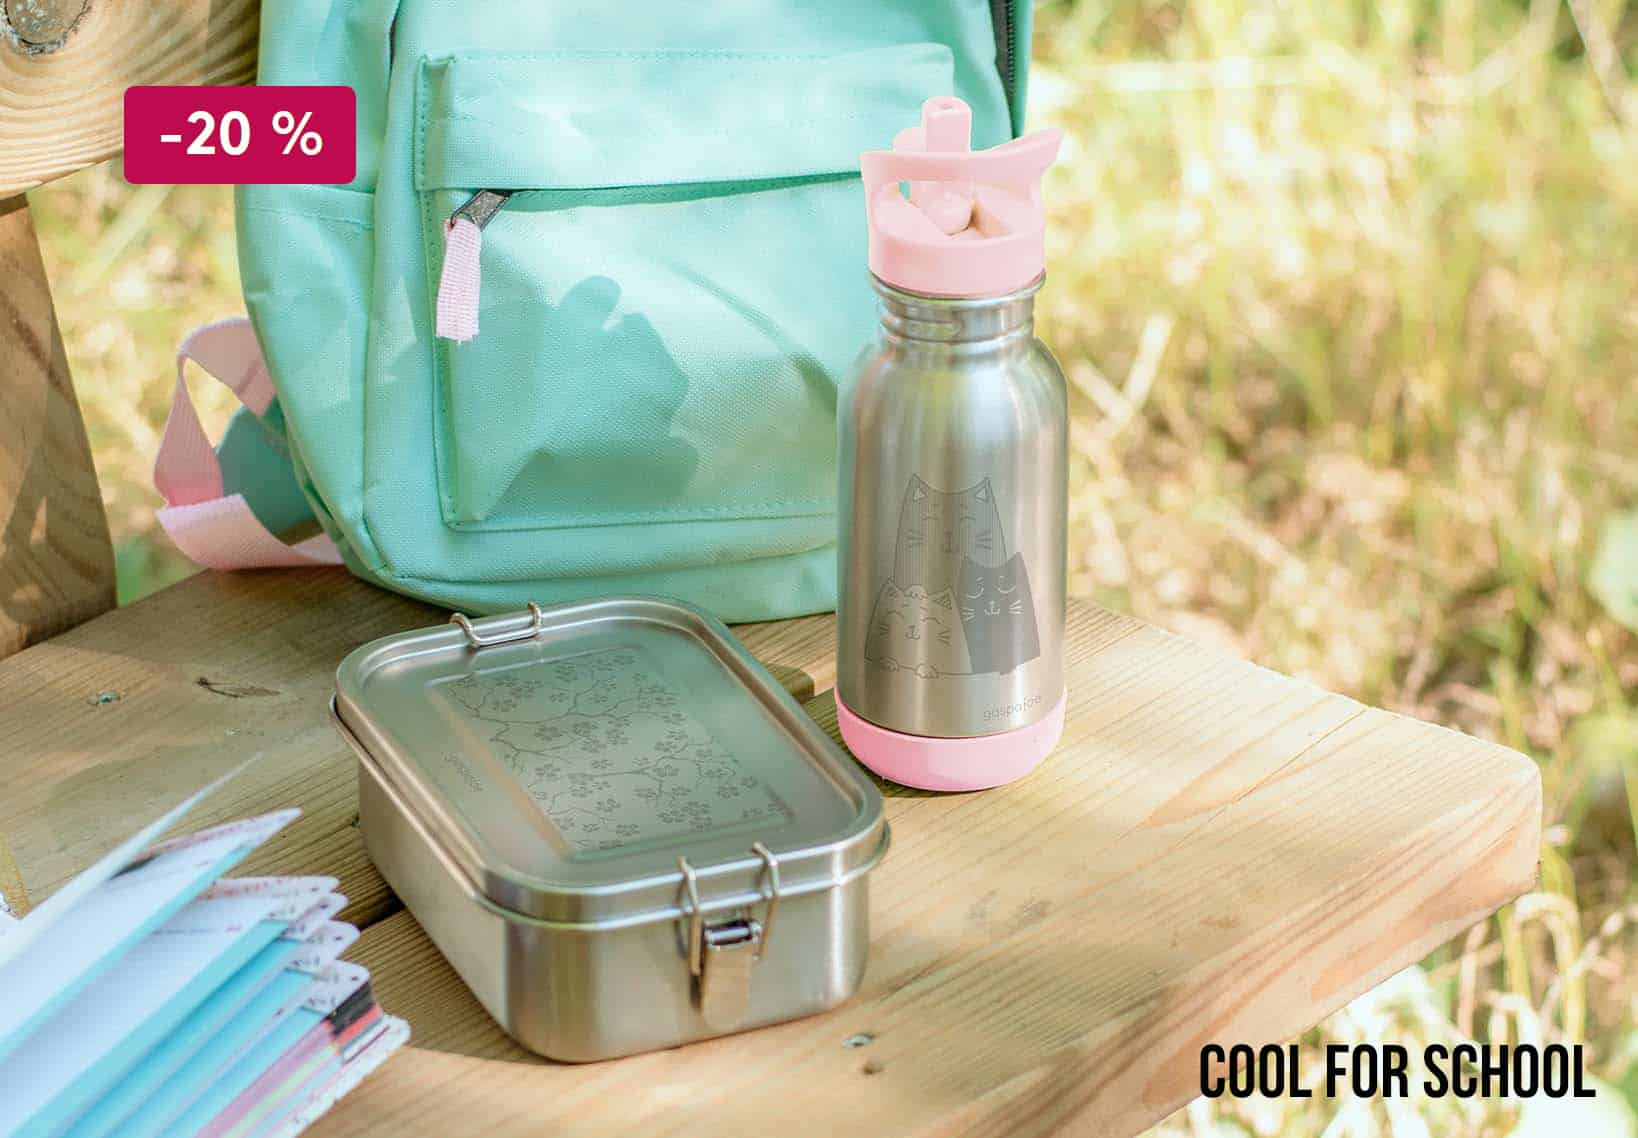 COOL-FOR-SCHOOL_20%